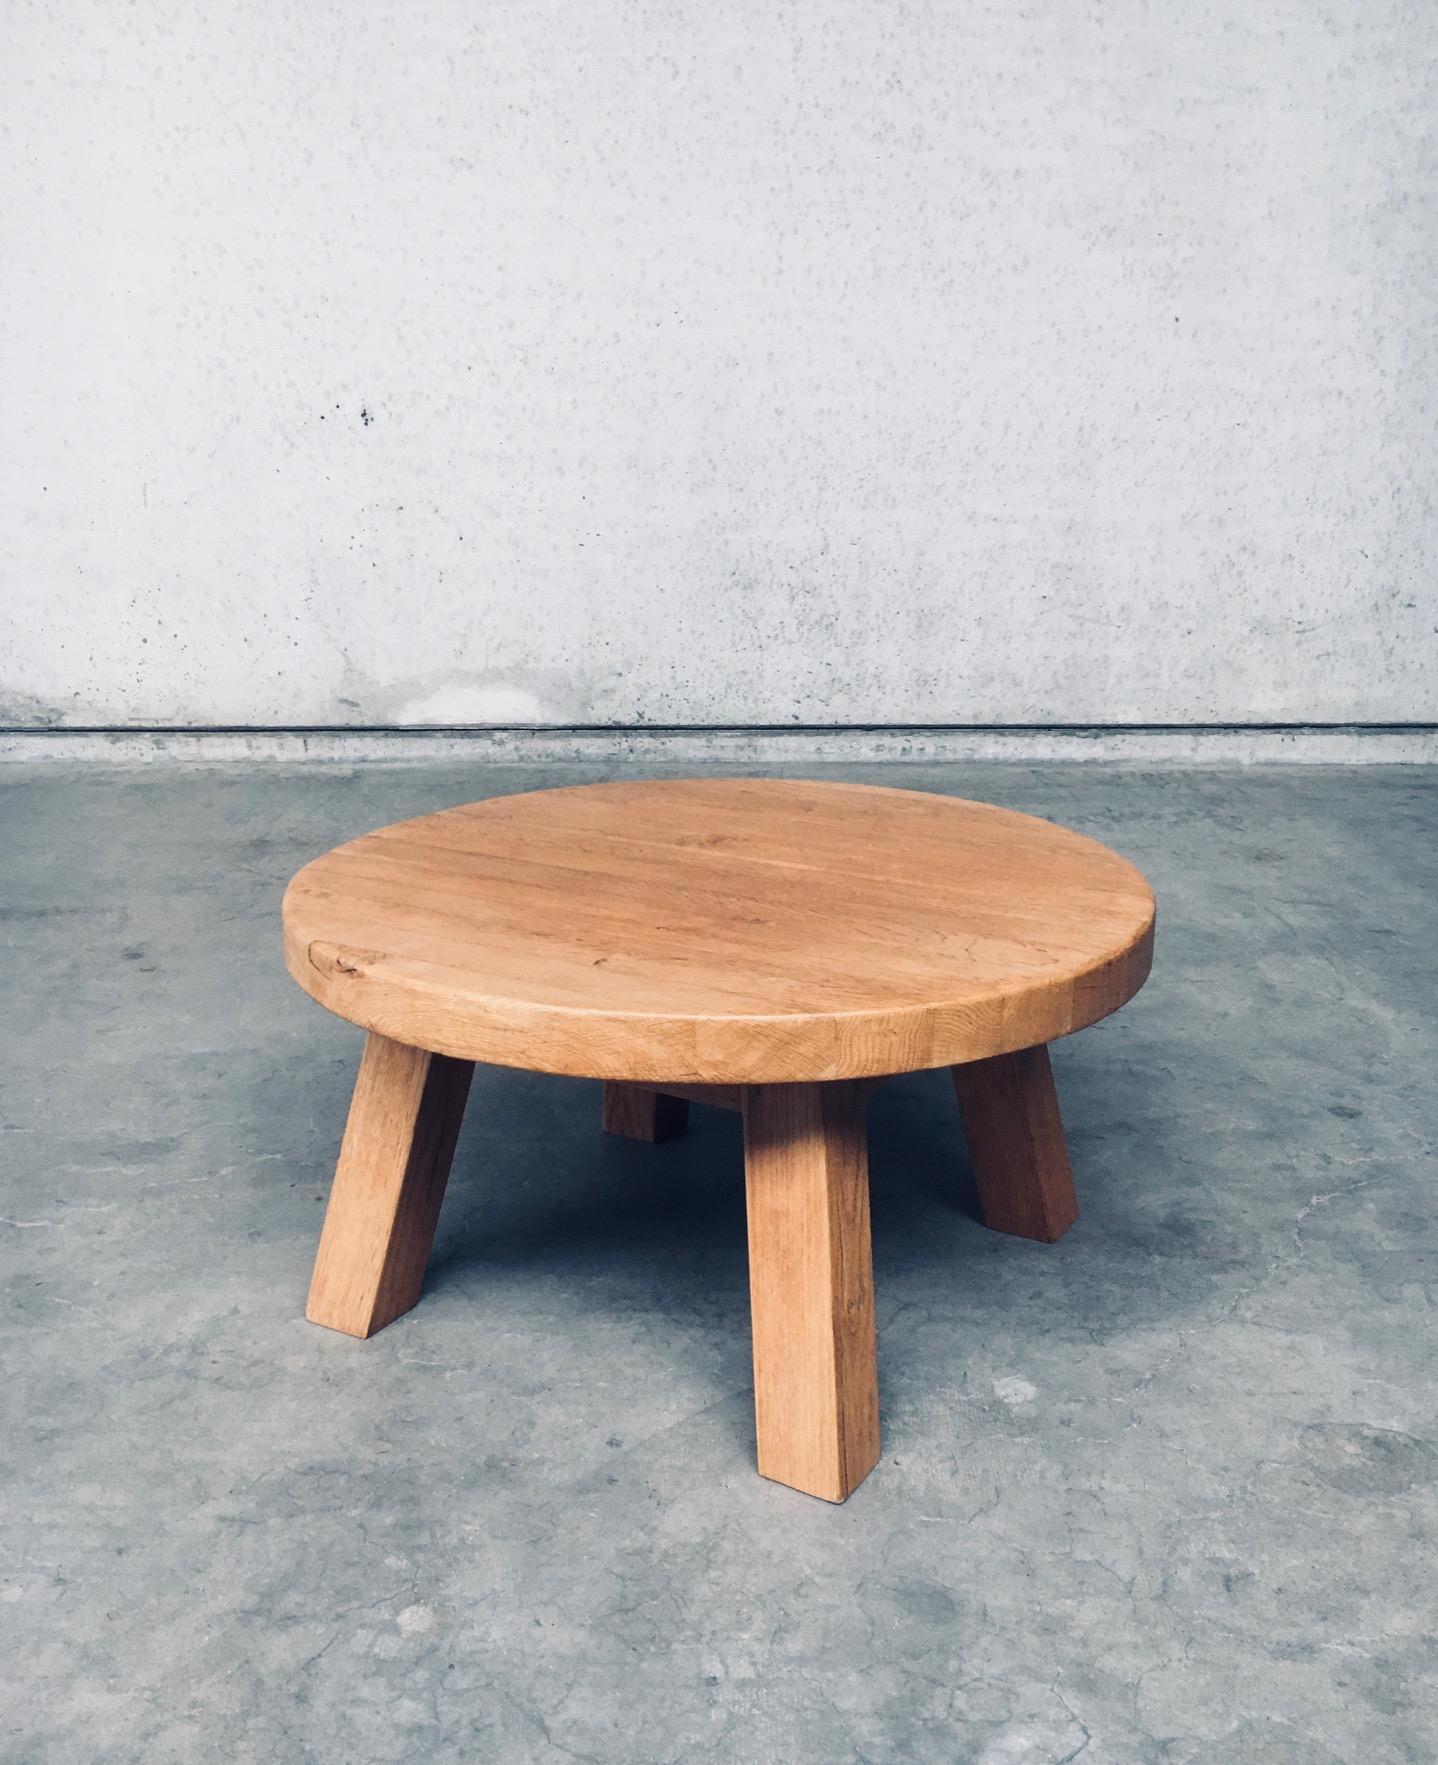 Vintage Brutalist Dutch Design Oak Round Coffee Table. Made in the Netherlands, 1960's period. Solid light oak constructed coffee table. Round table top with 4 rectagular feet. This comes in very good condition with minor signs of it's use and age.